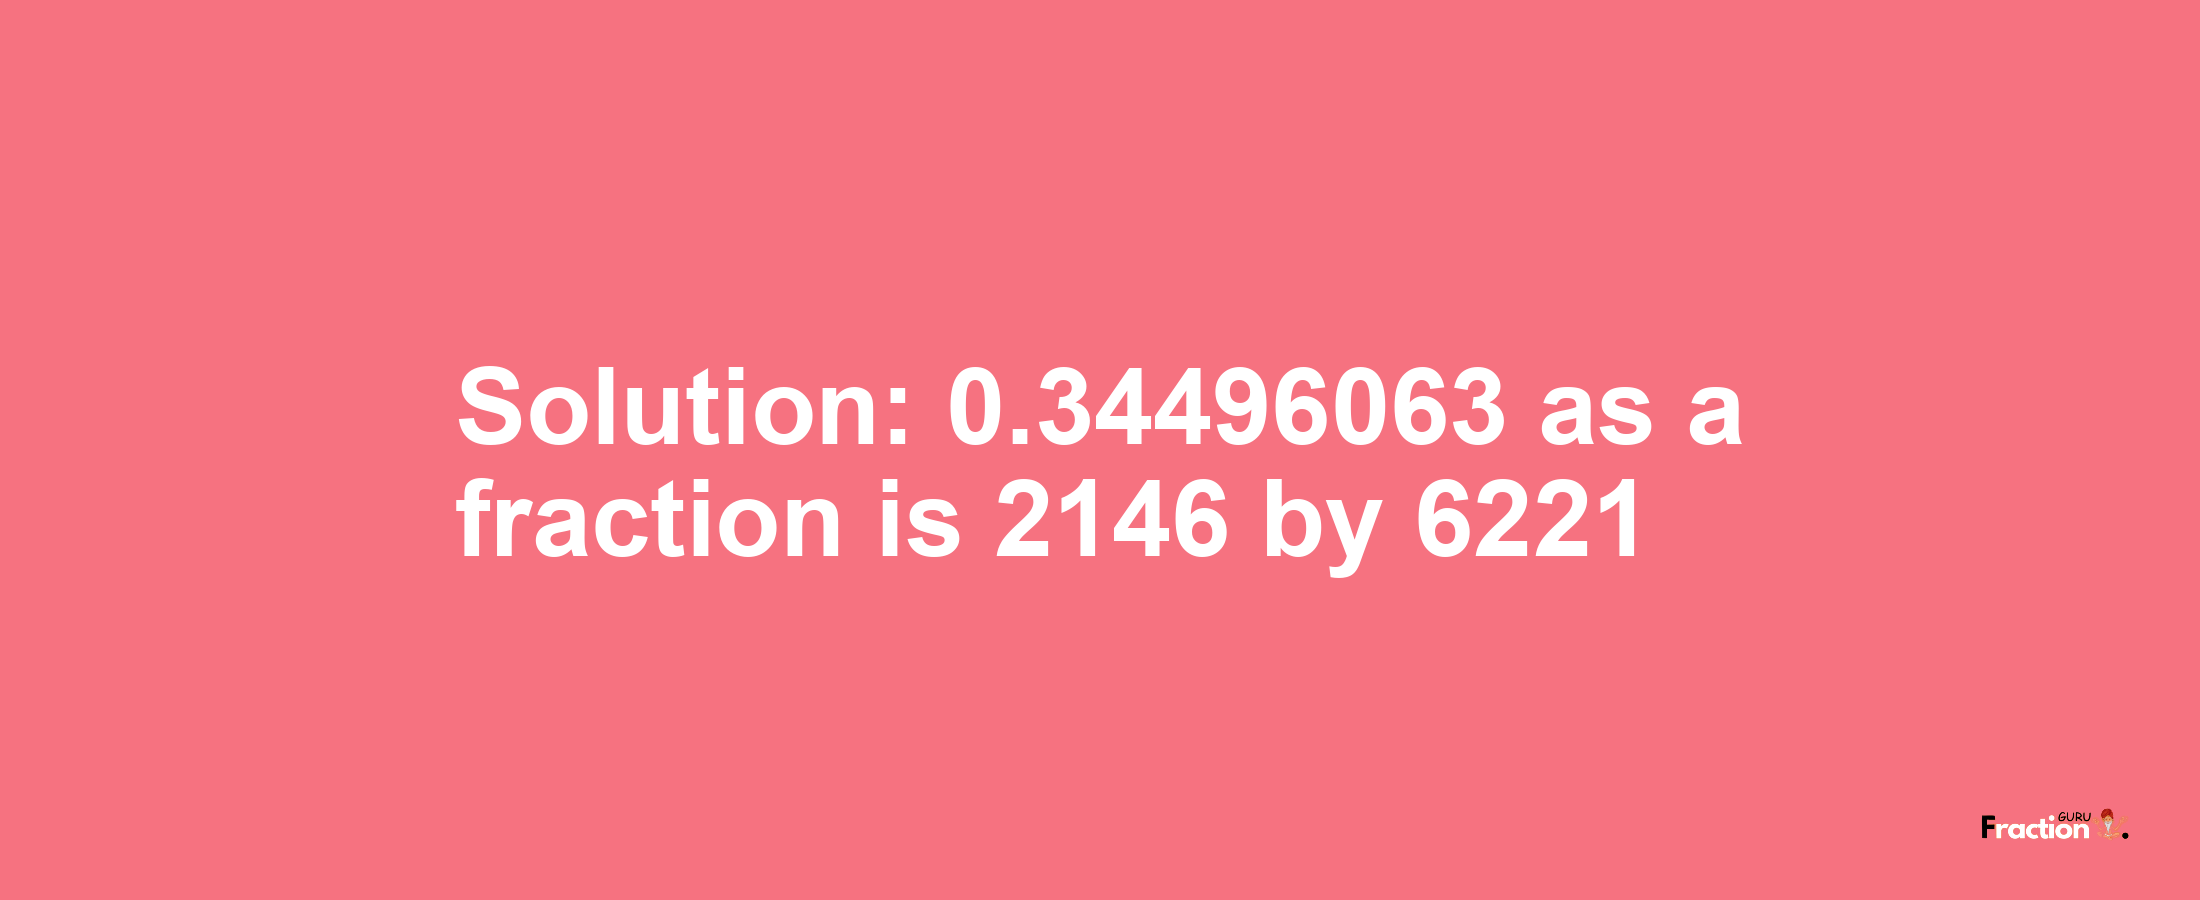 Solution:0.34496063 as a fraction is 2146/6221